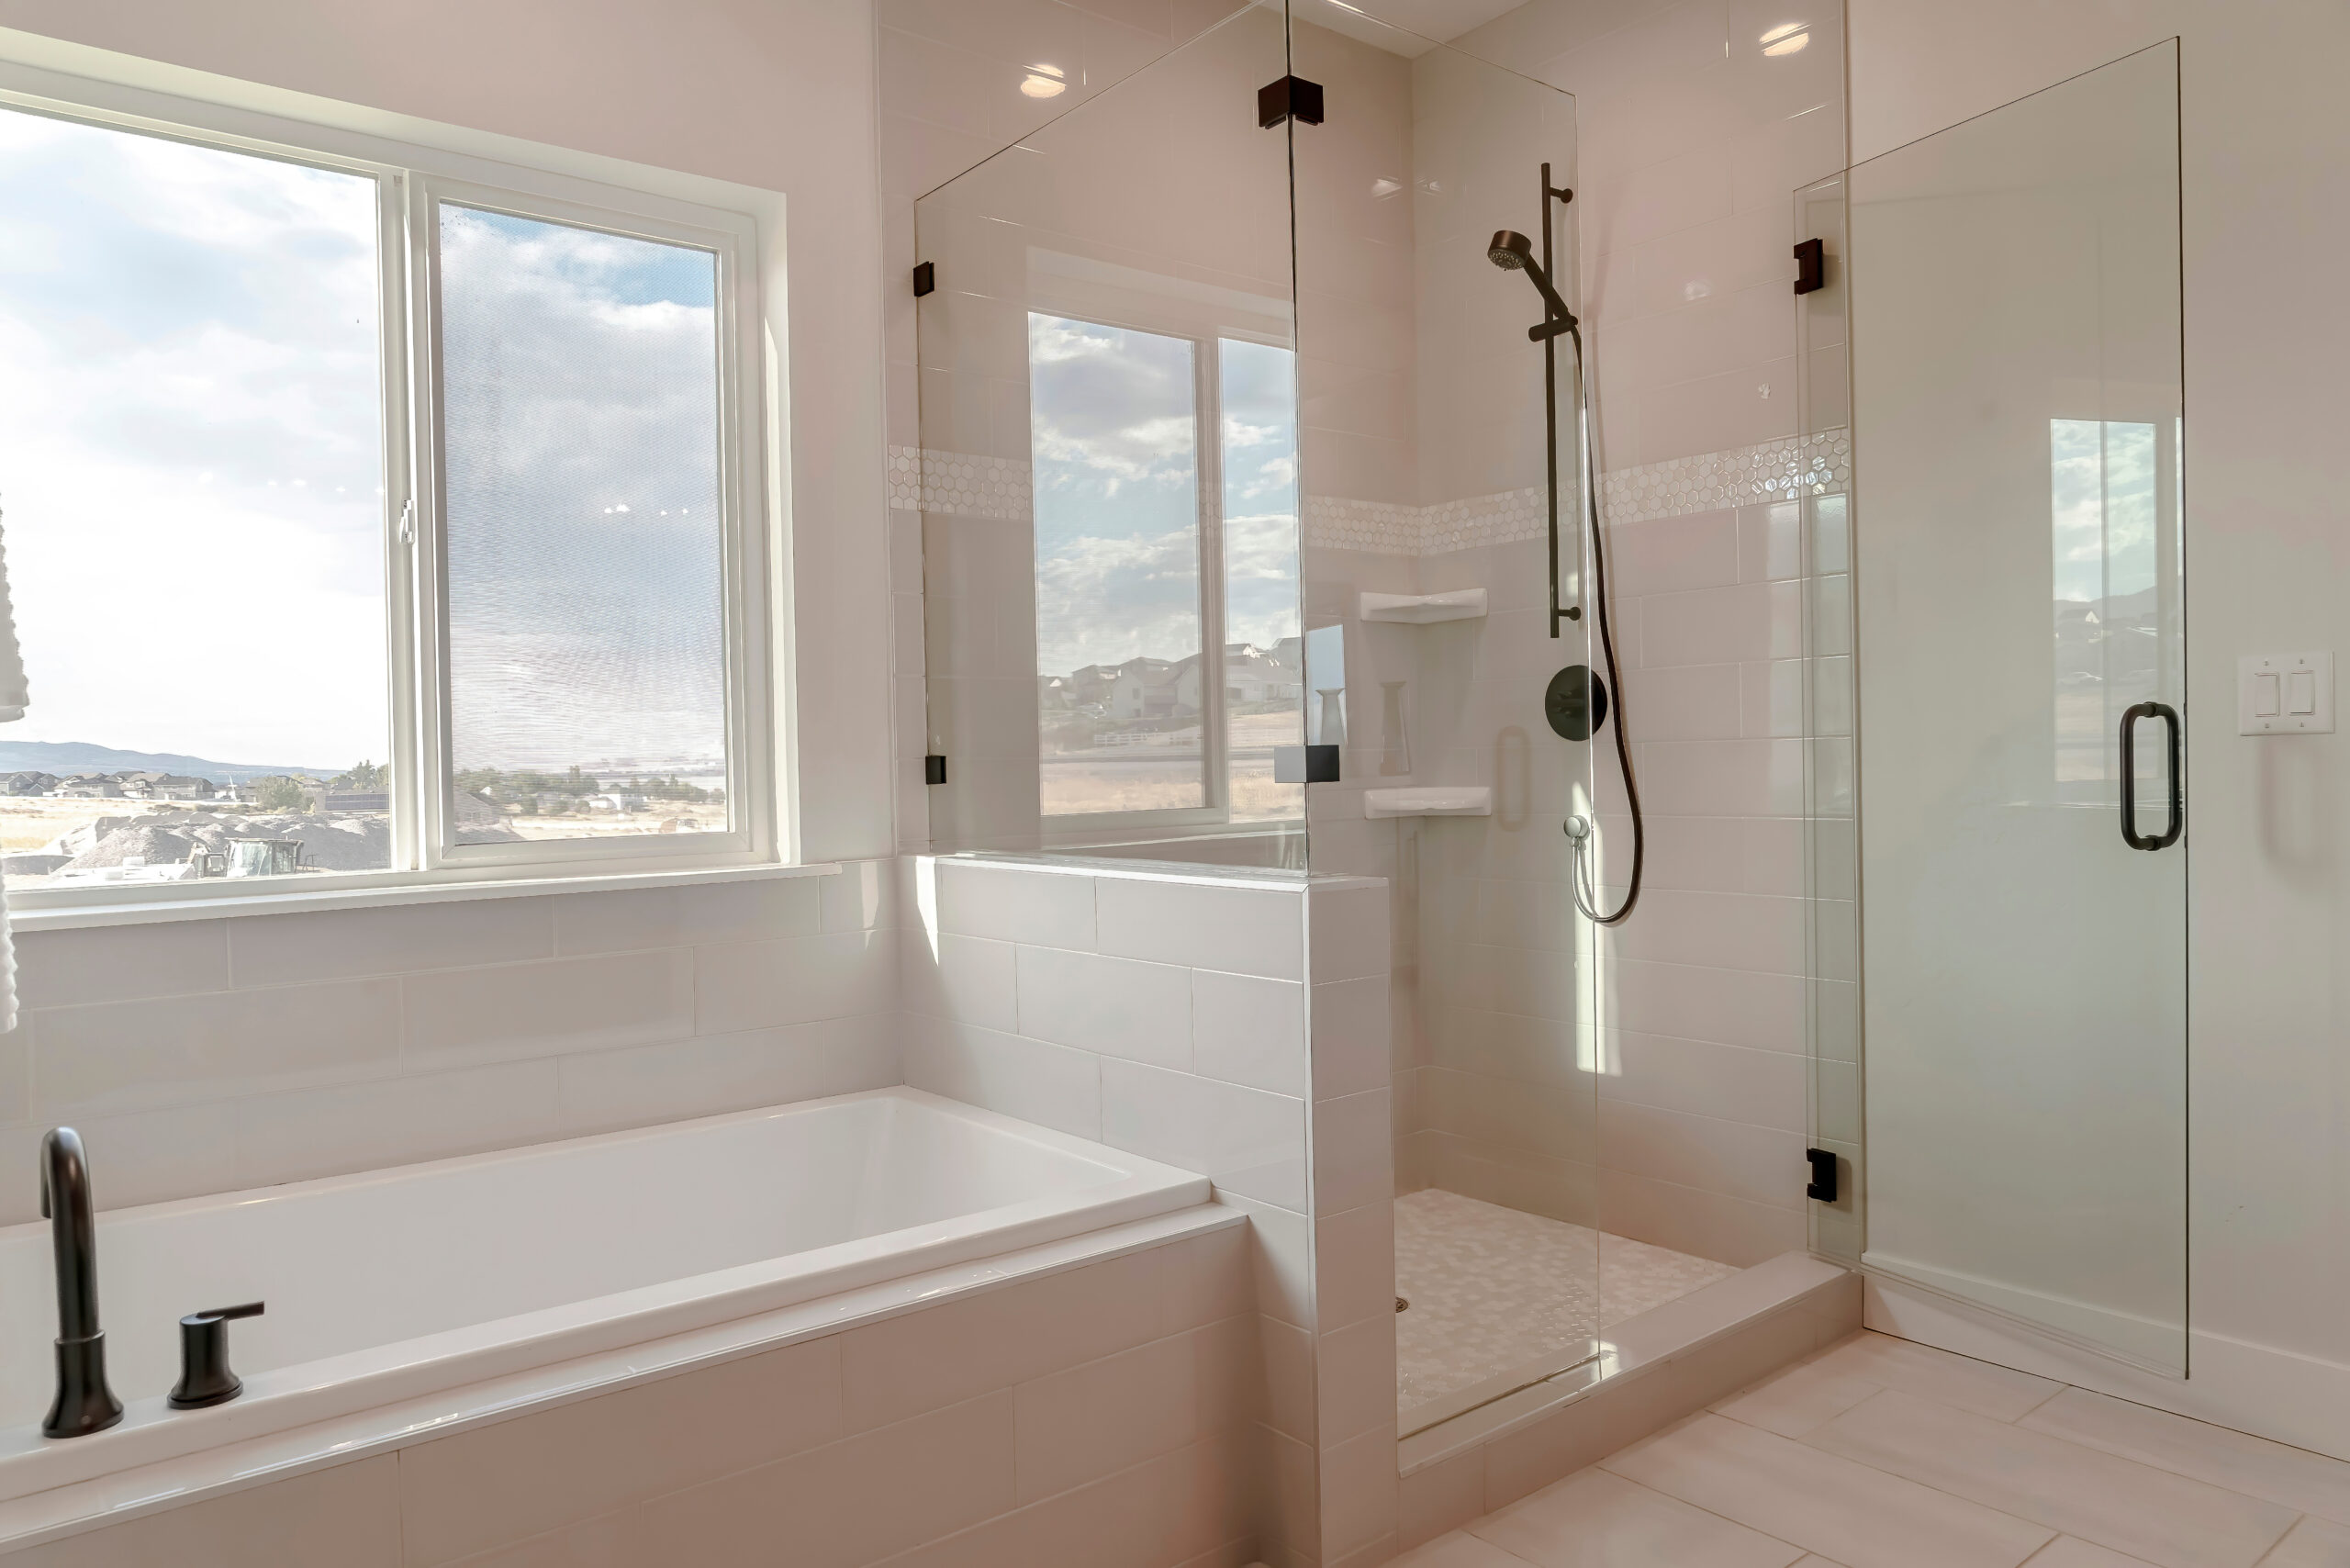 The Benefits of a ClearShield Shower Glass Treatment